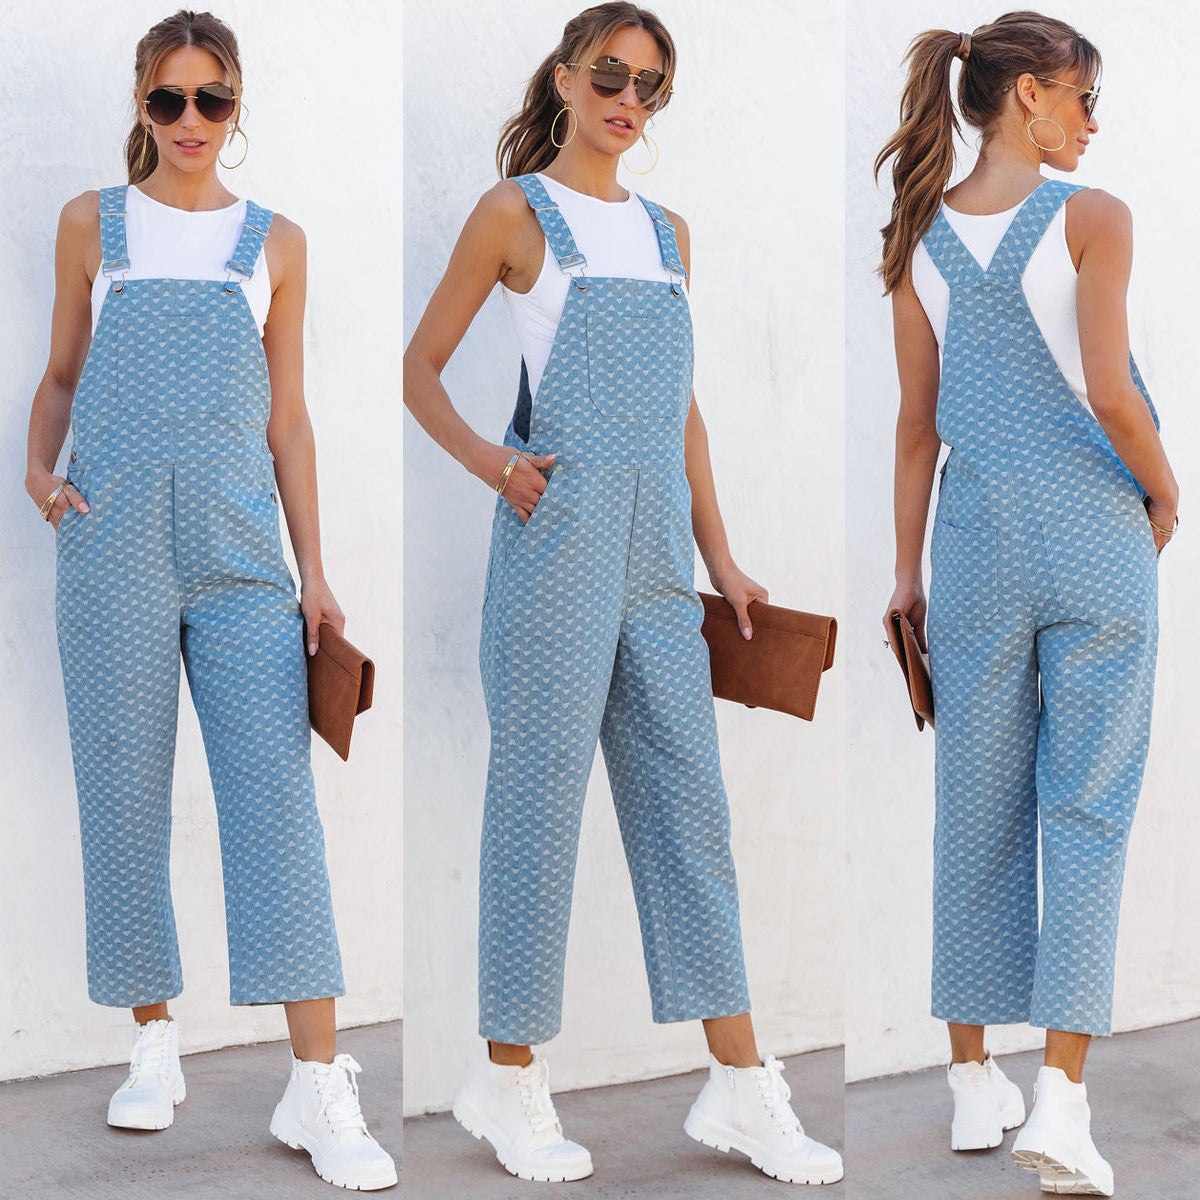 Denim Overalls with Jacquard Pattern | CozyCouture® - Stringspeed